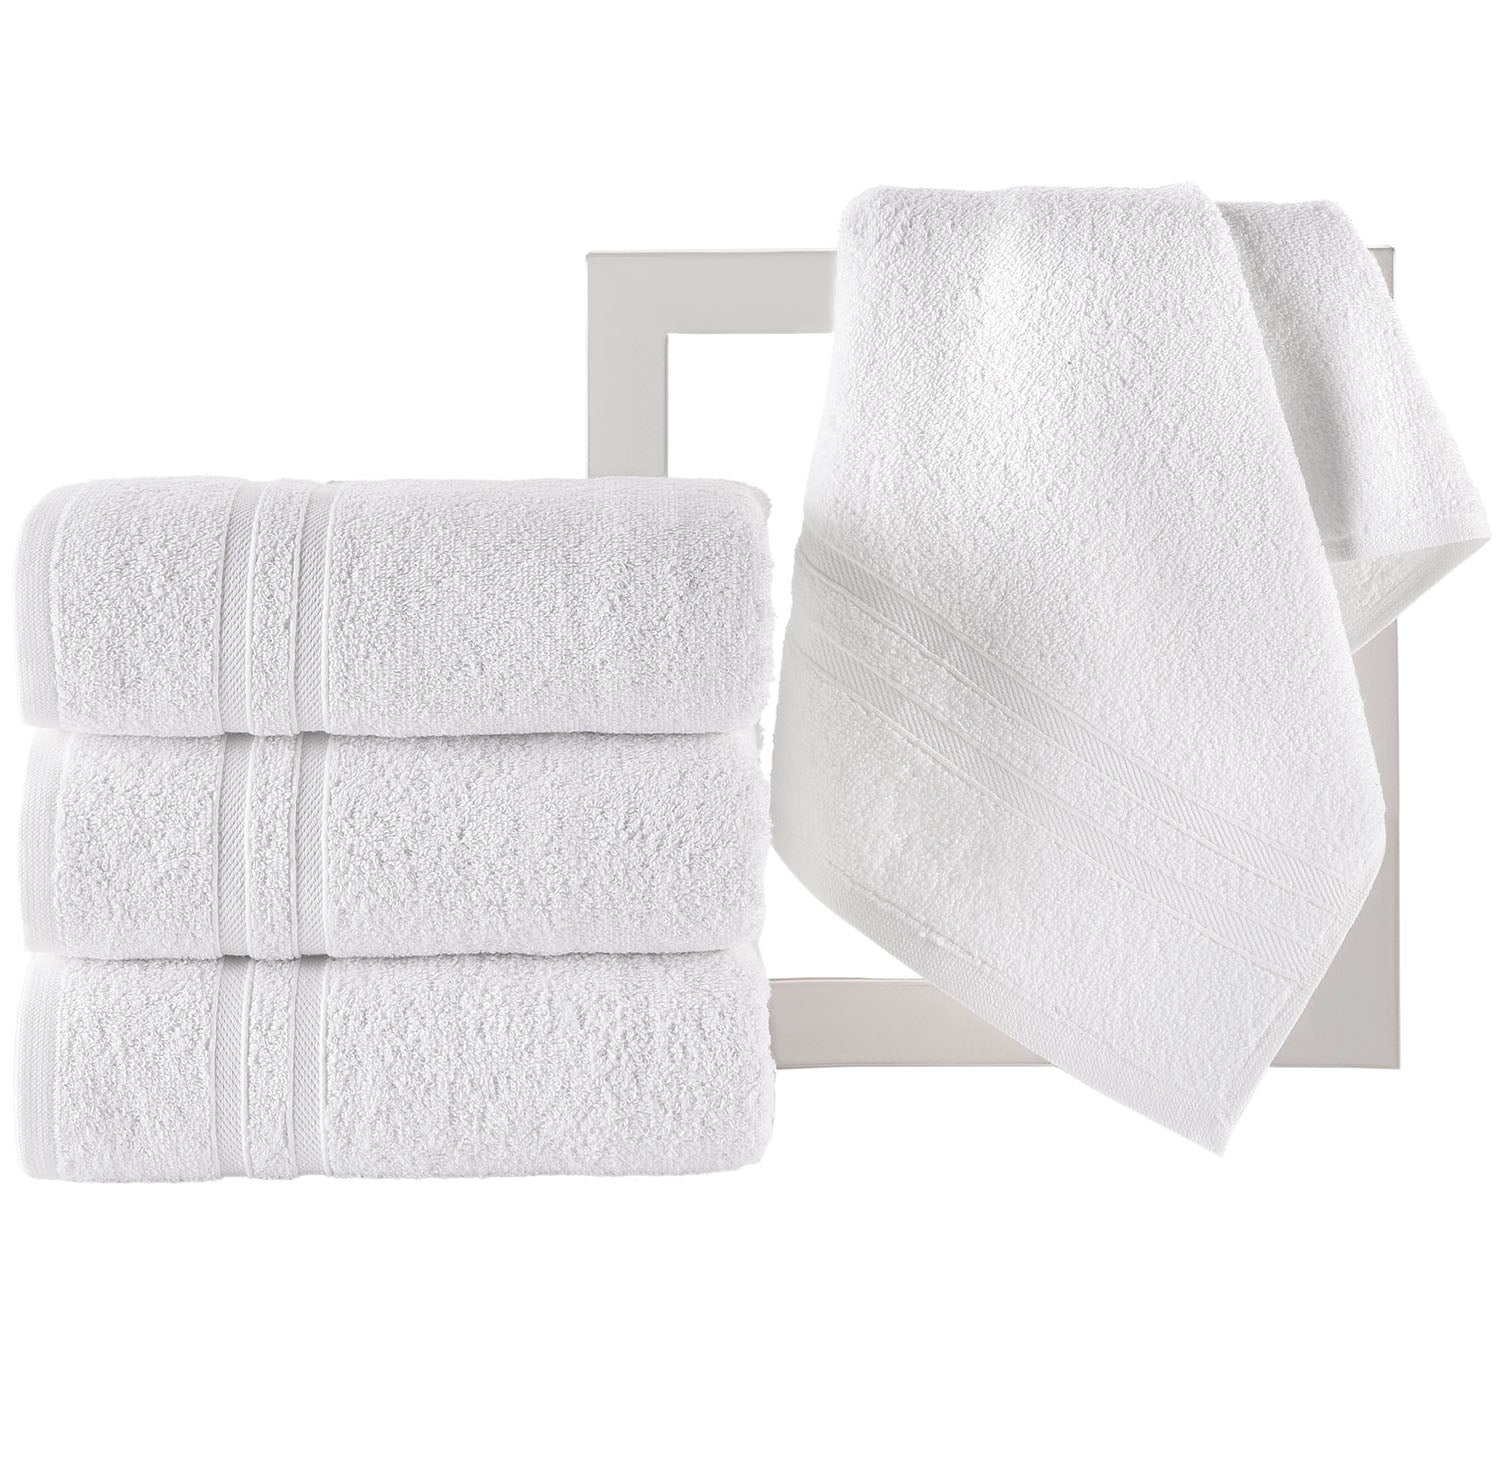 image 2 of Hammam Linen White Hand Towels Set of 4 – Luxury Cotton Hand Towels for Bathroom – Soft Quick Dry Towels